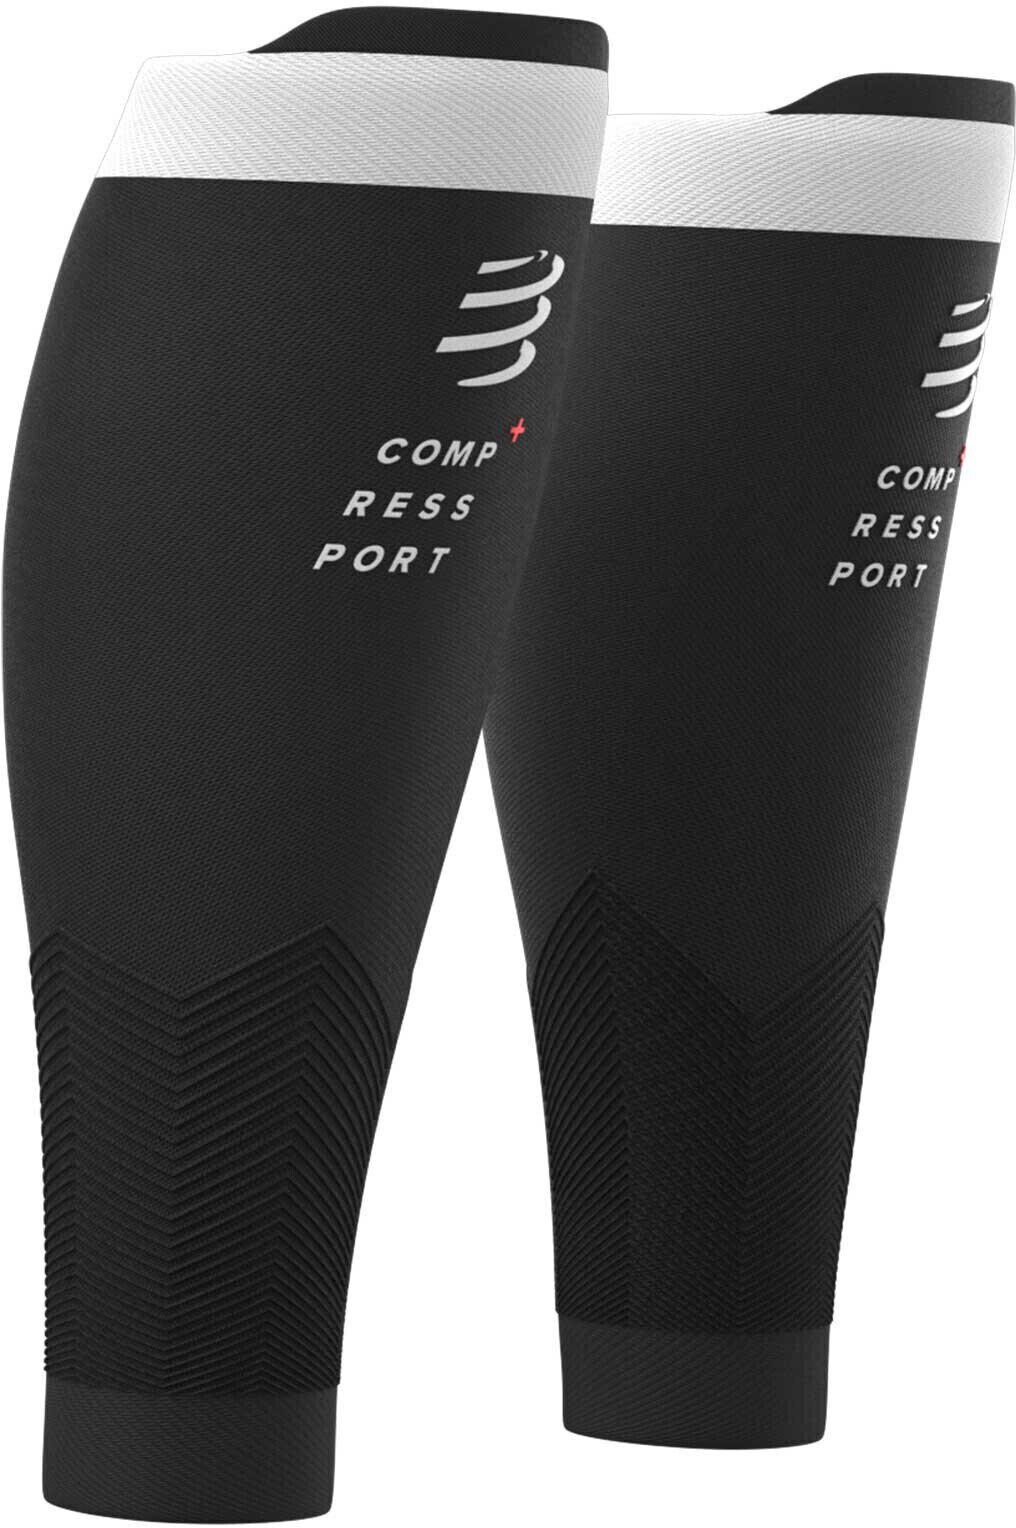 Calf covers for runners Compressport R2v2 Black T2 Calf covers for runners